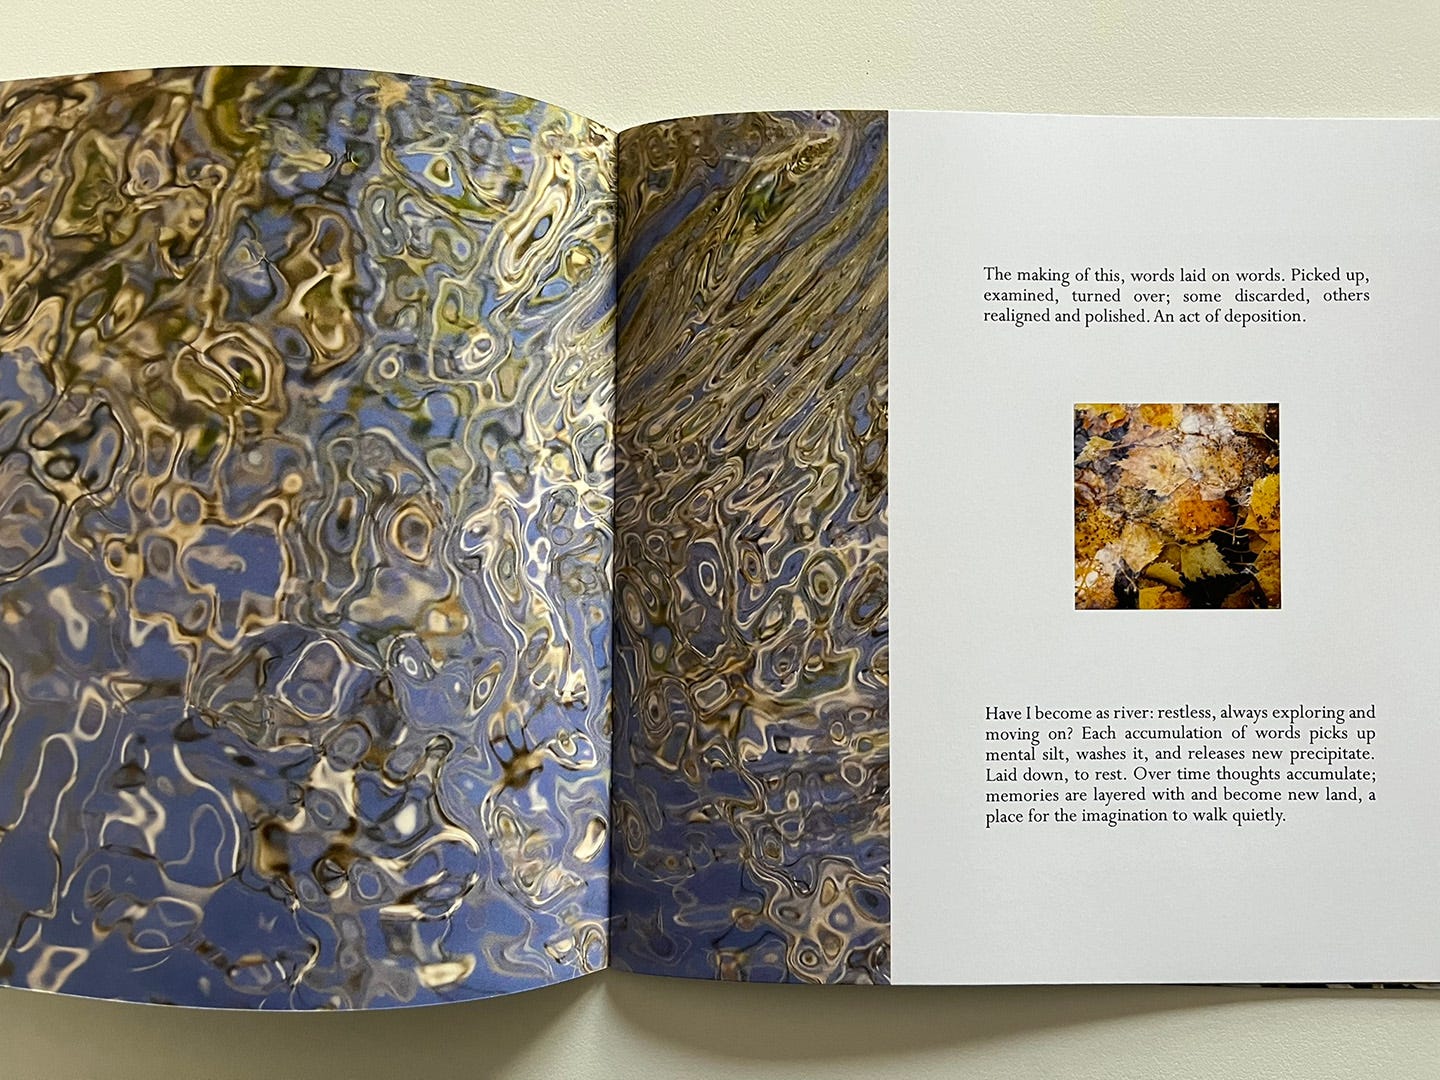 Sample spread from A New Topography by Michela Griffith